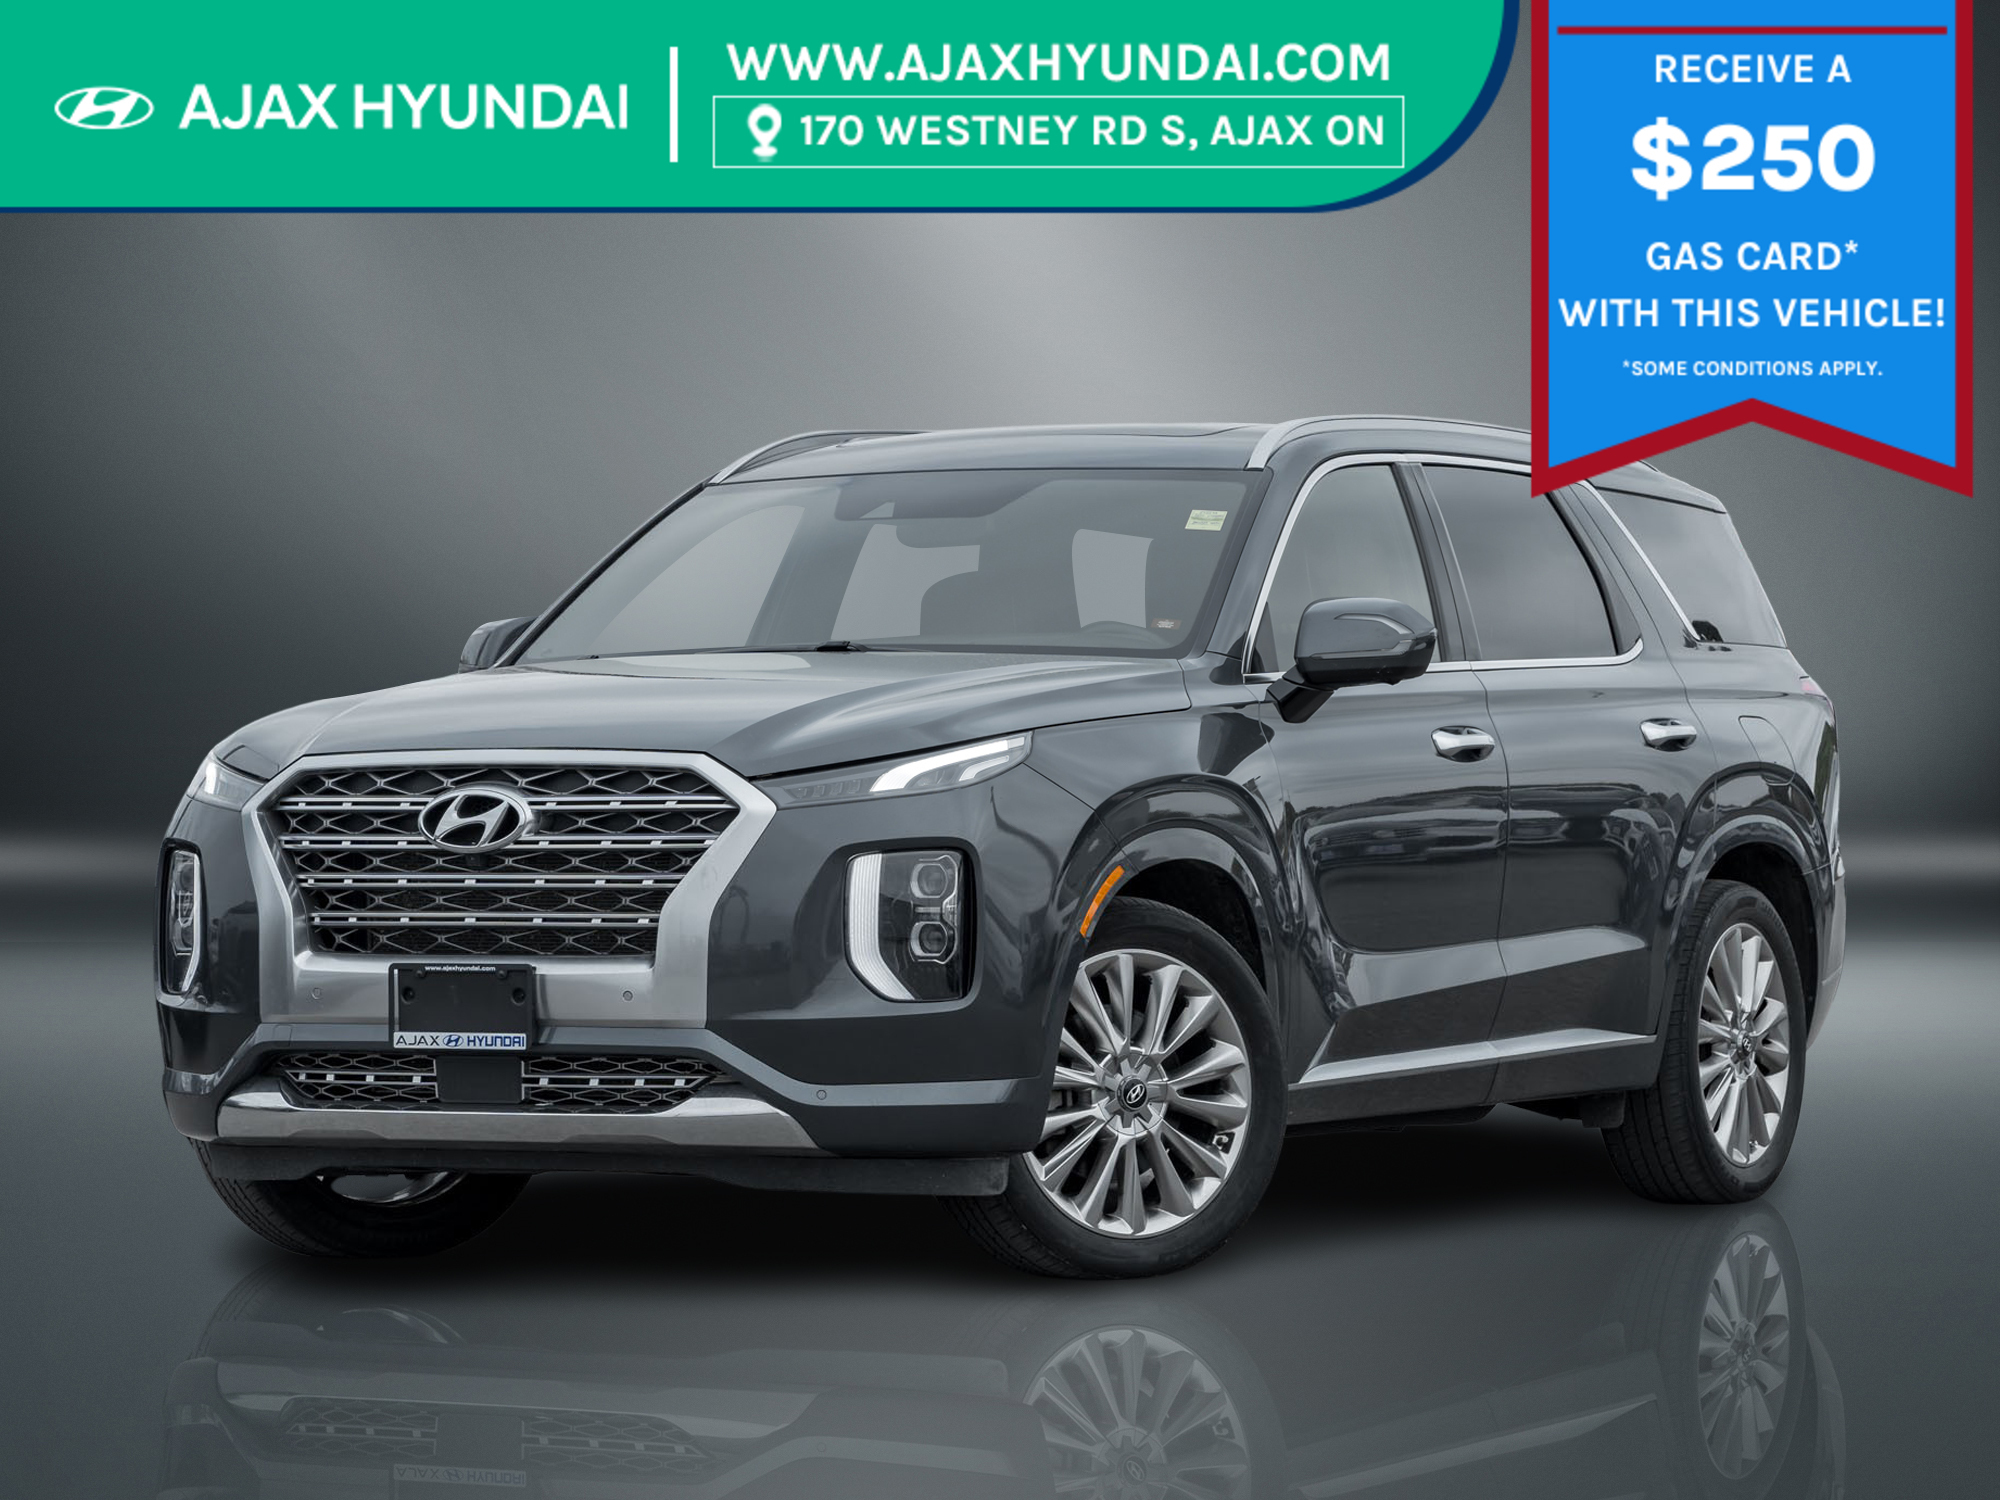 2020 Hyundai Palisade ULTIMATE | RATES FROM 4.99% ULTIMATE | RATES FROM 